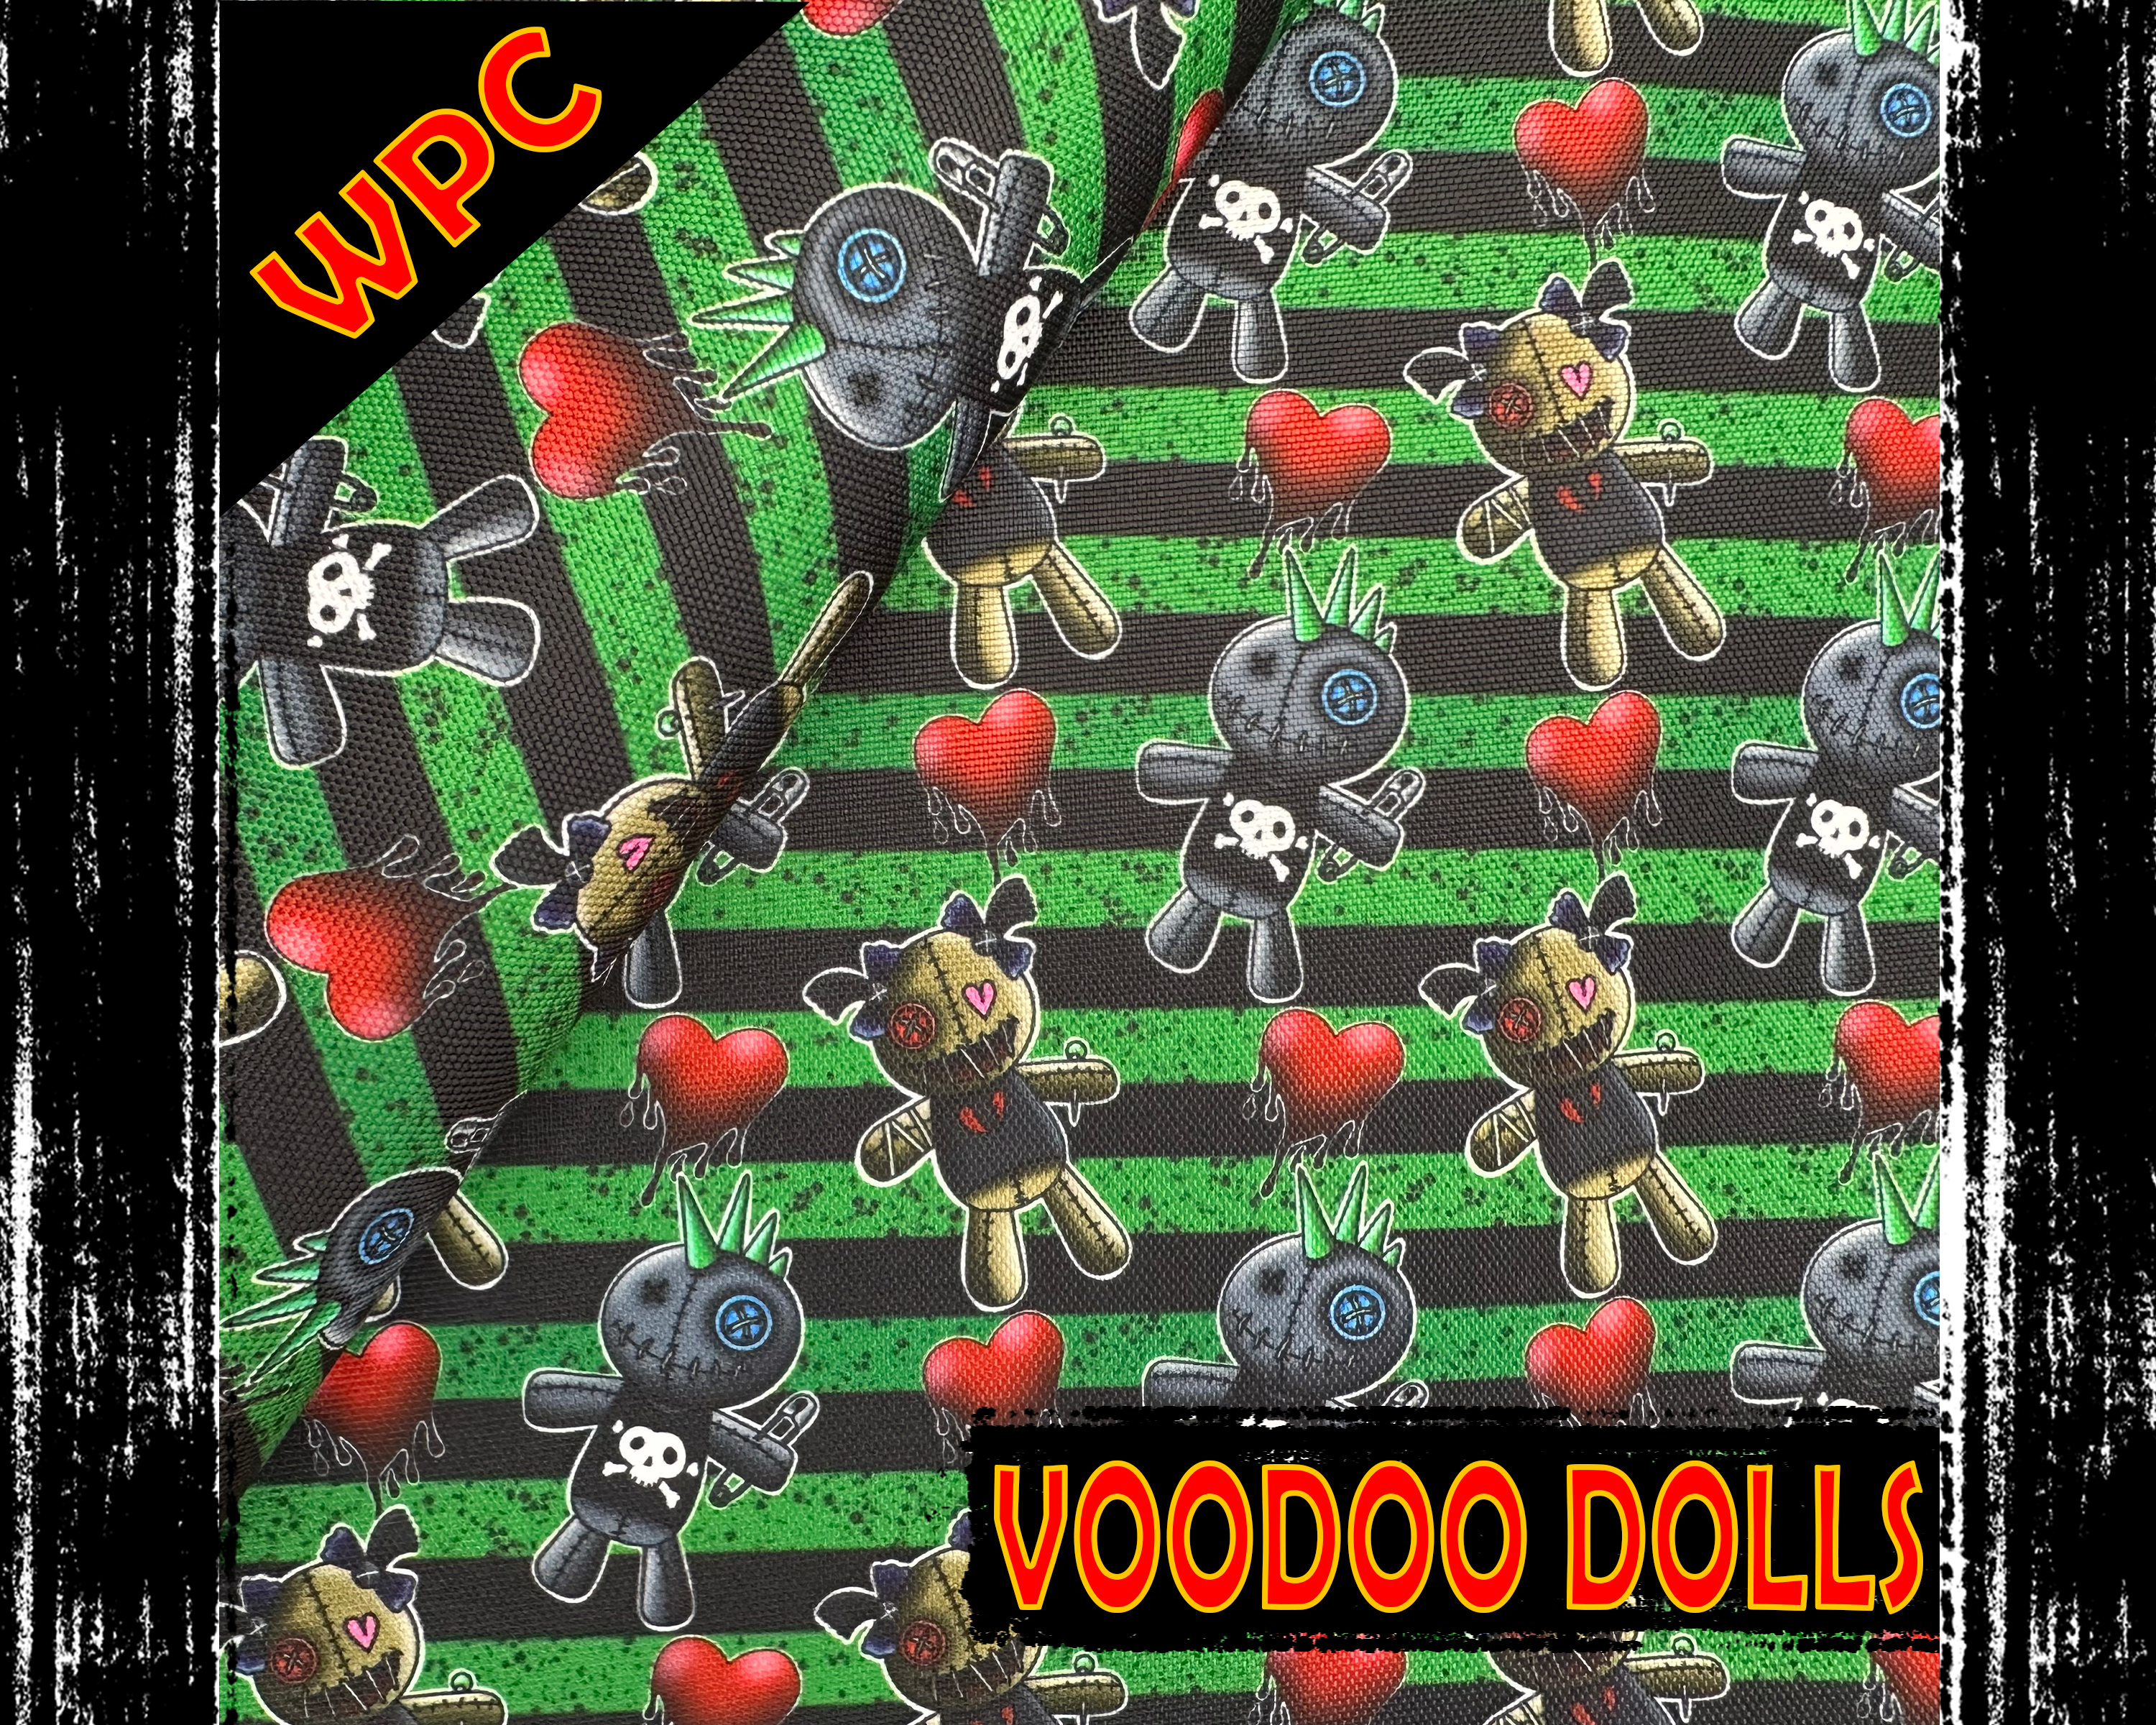 Voodoo Dolls, Waterproof Polyester Canvas. Green and Black stripe background